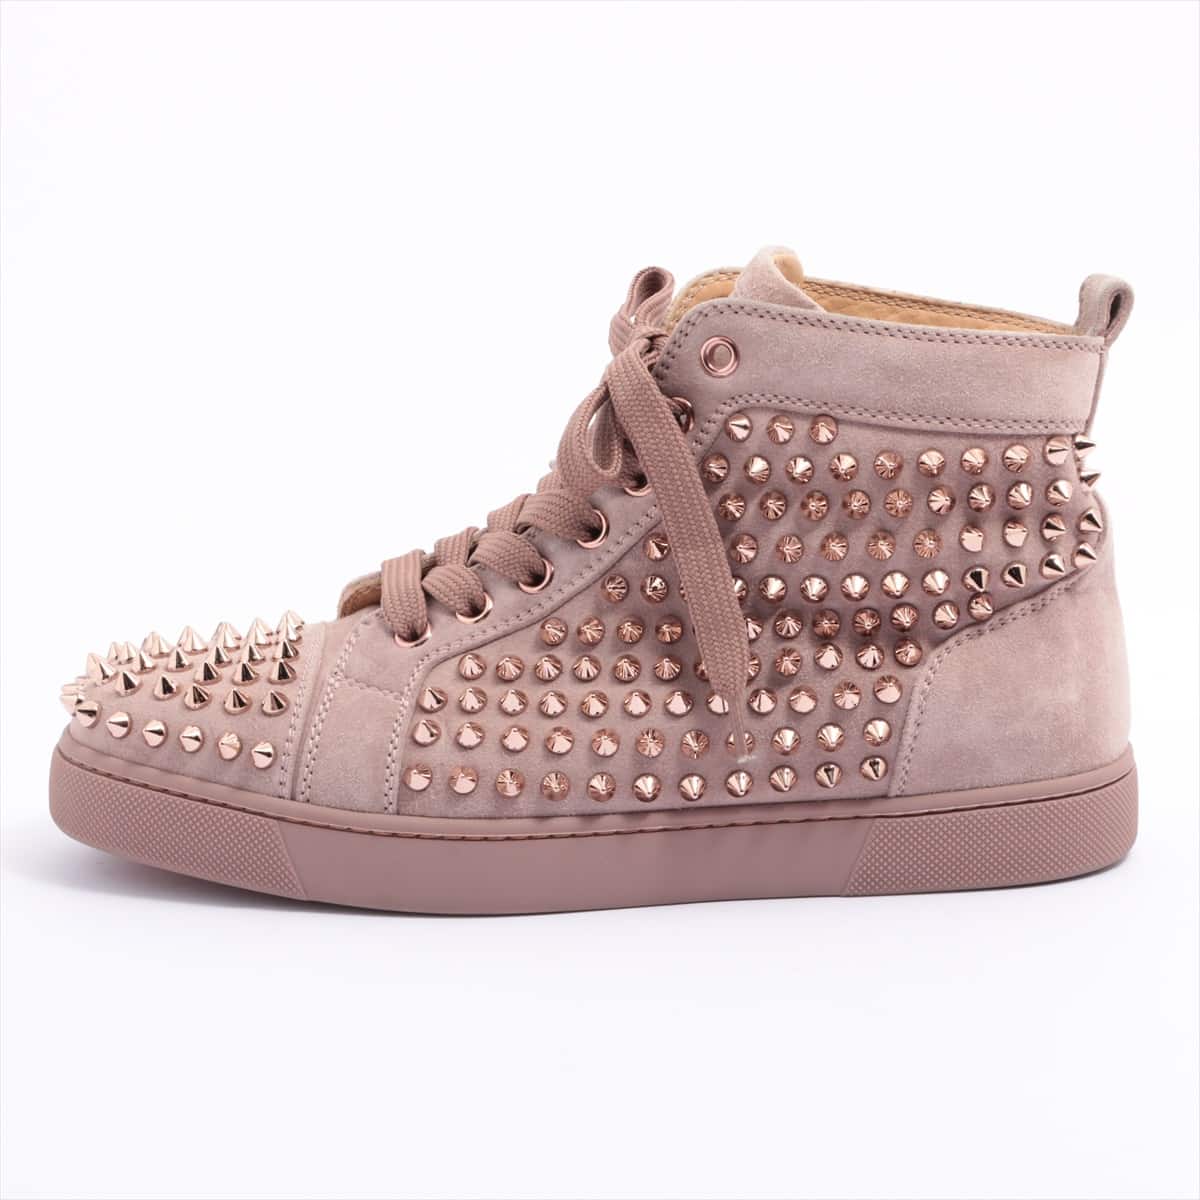 Christian Louboutin Suede leather High-top Sneakers 37 Ladies' Pink beige Spike Studs